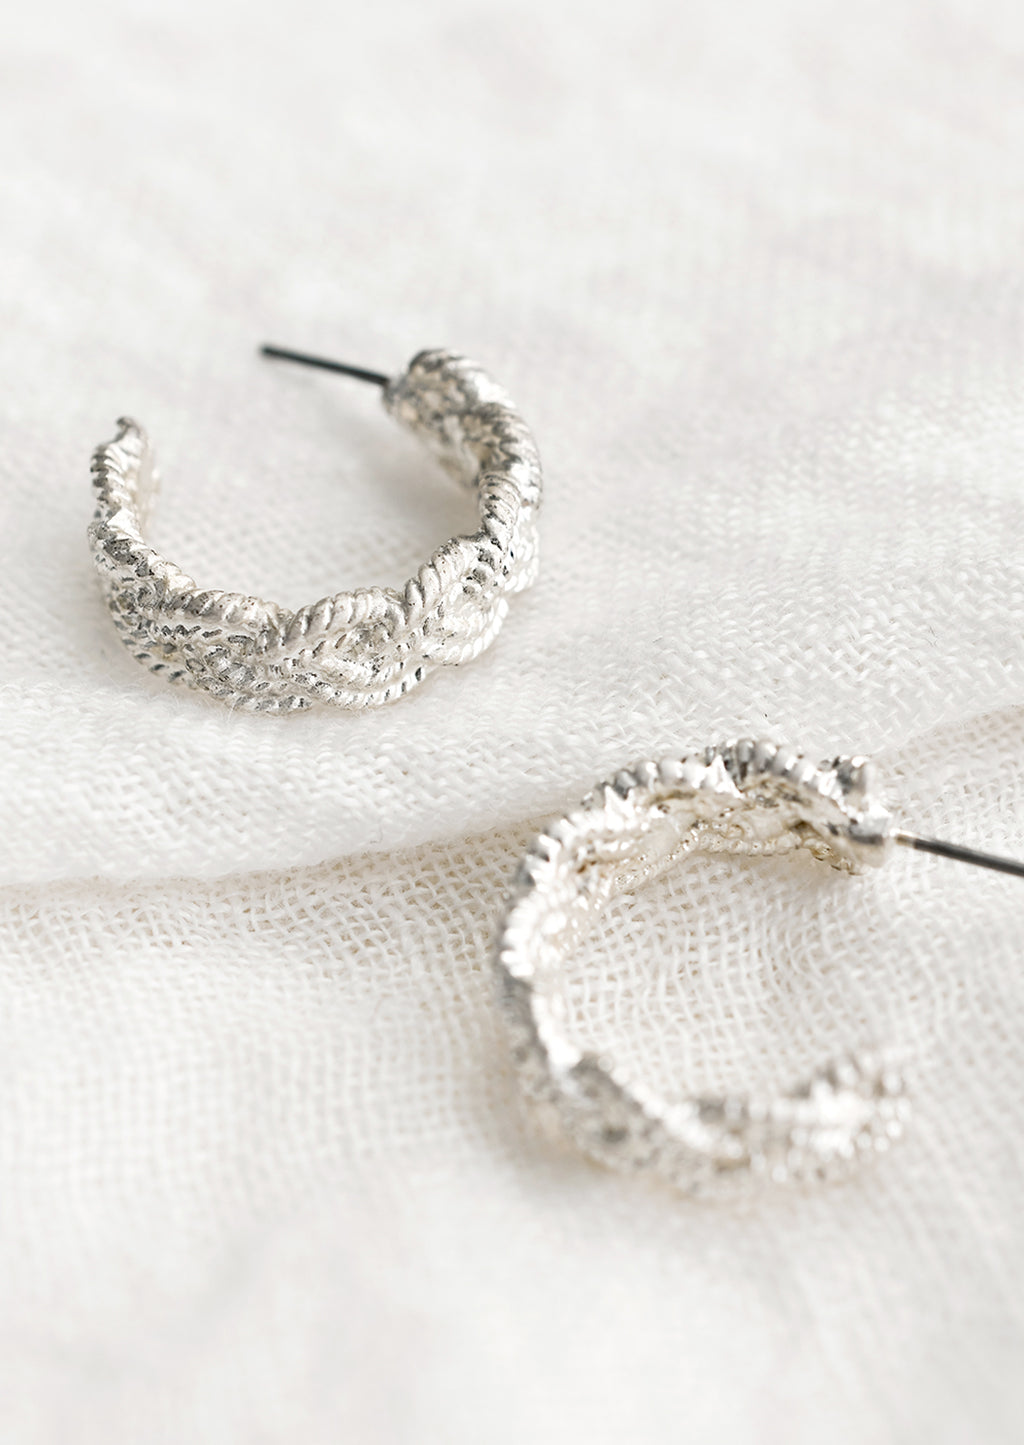 2: A pair of silver-tone hoop earrings with braided texture.